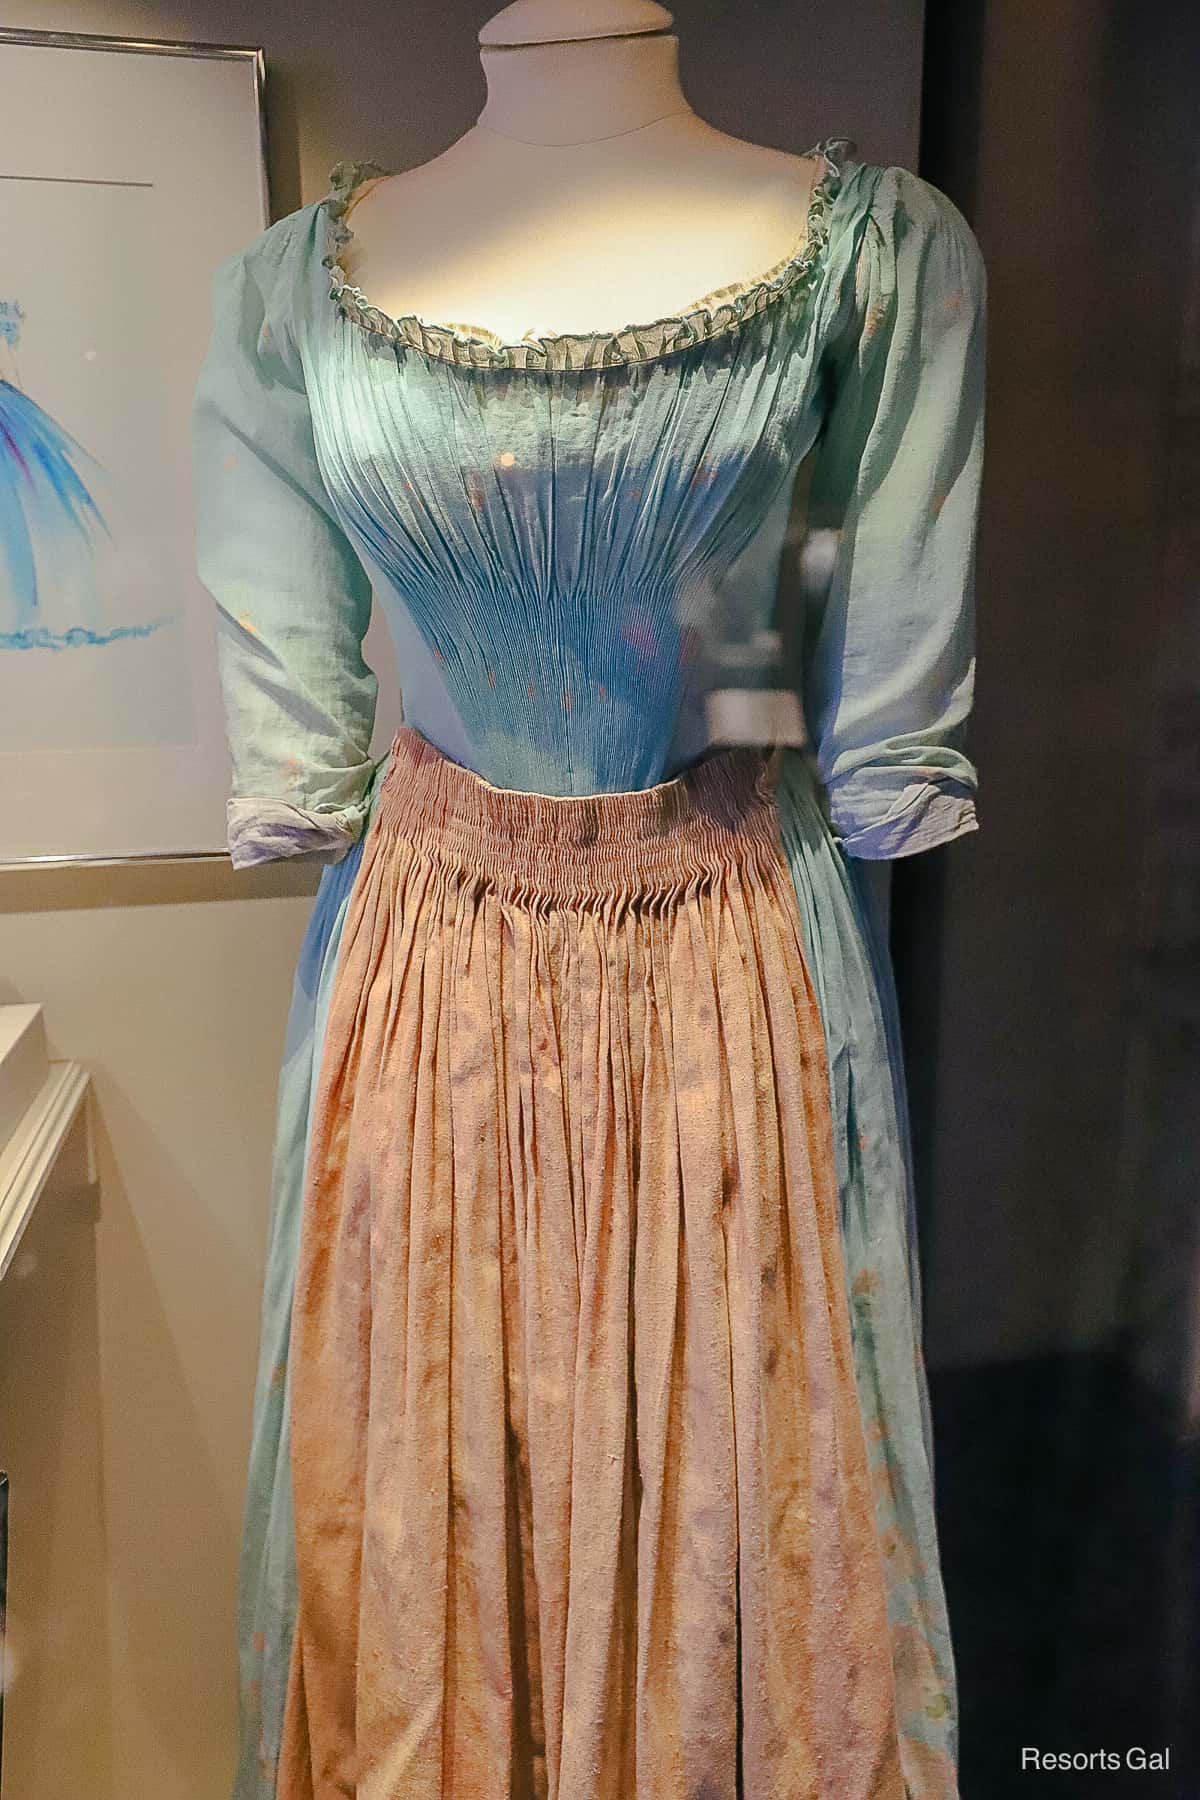 Cinderella's peasant dress from the Live-Action Cinderella